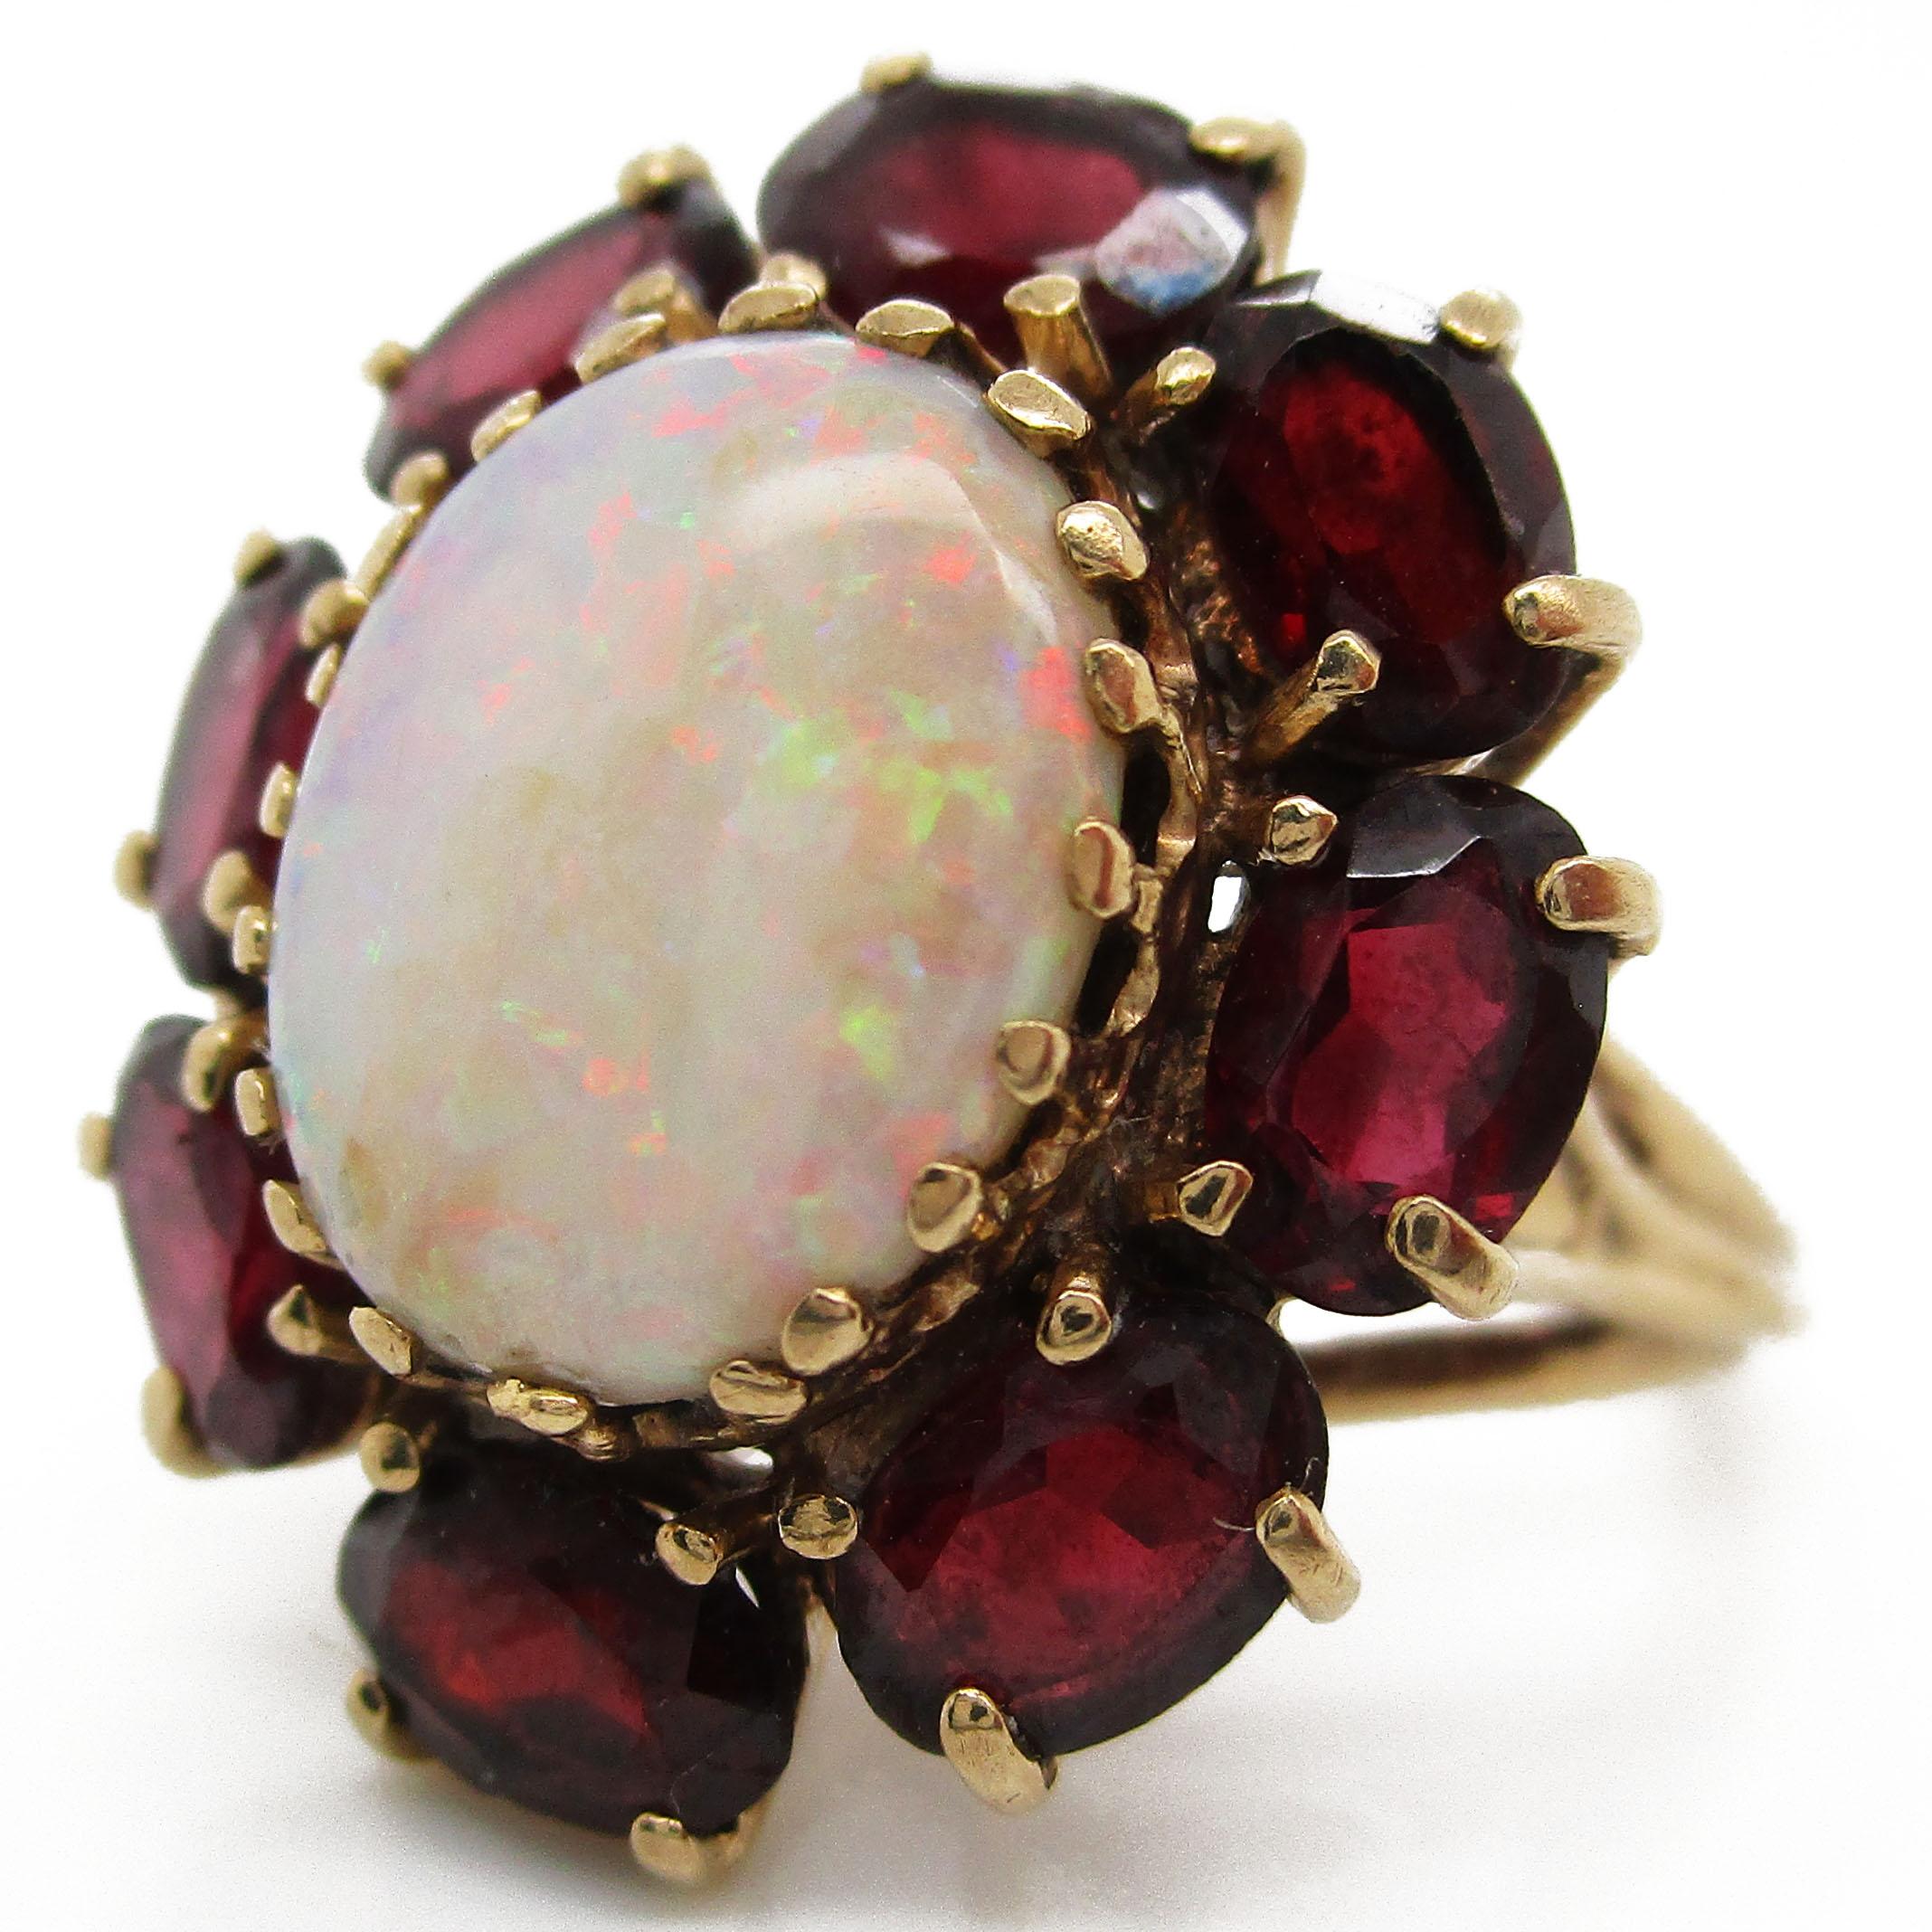 This killer ring is an awesome 1950's design! The ring is 14 karat yellow gold with a white opal centerpiece (12.75x9.55mm opal). The opal has excellent bright red and green flashes with a smooth and even color play. Said opal is framed by 8